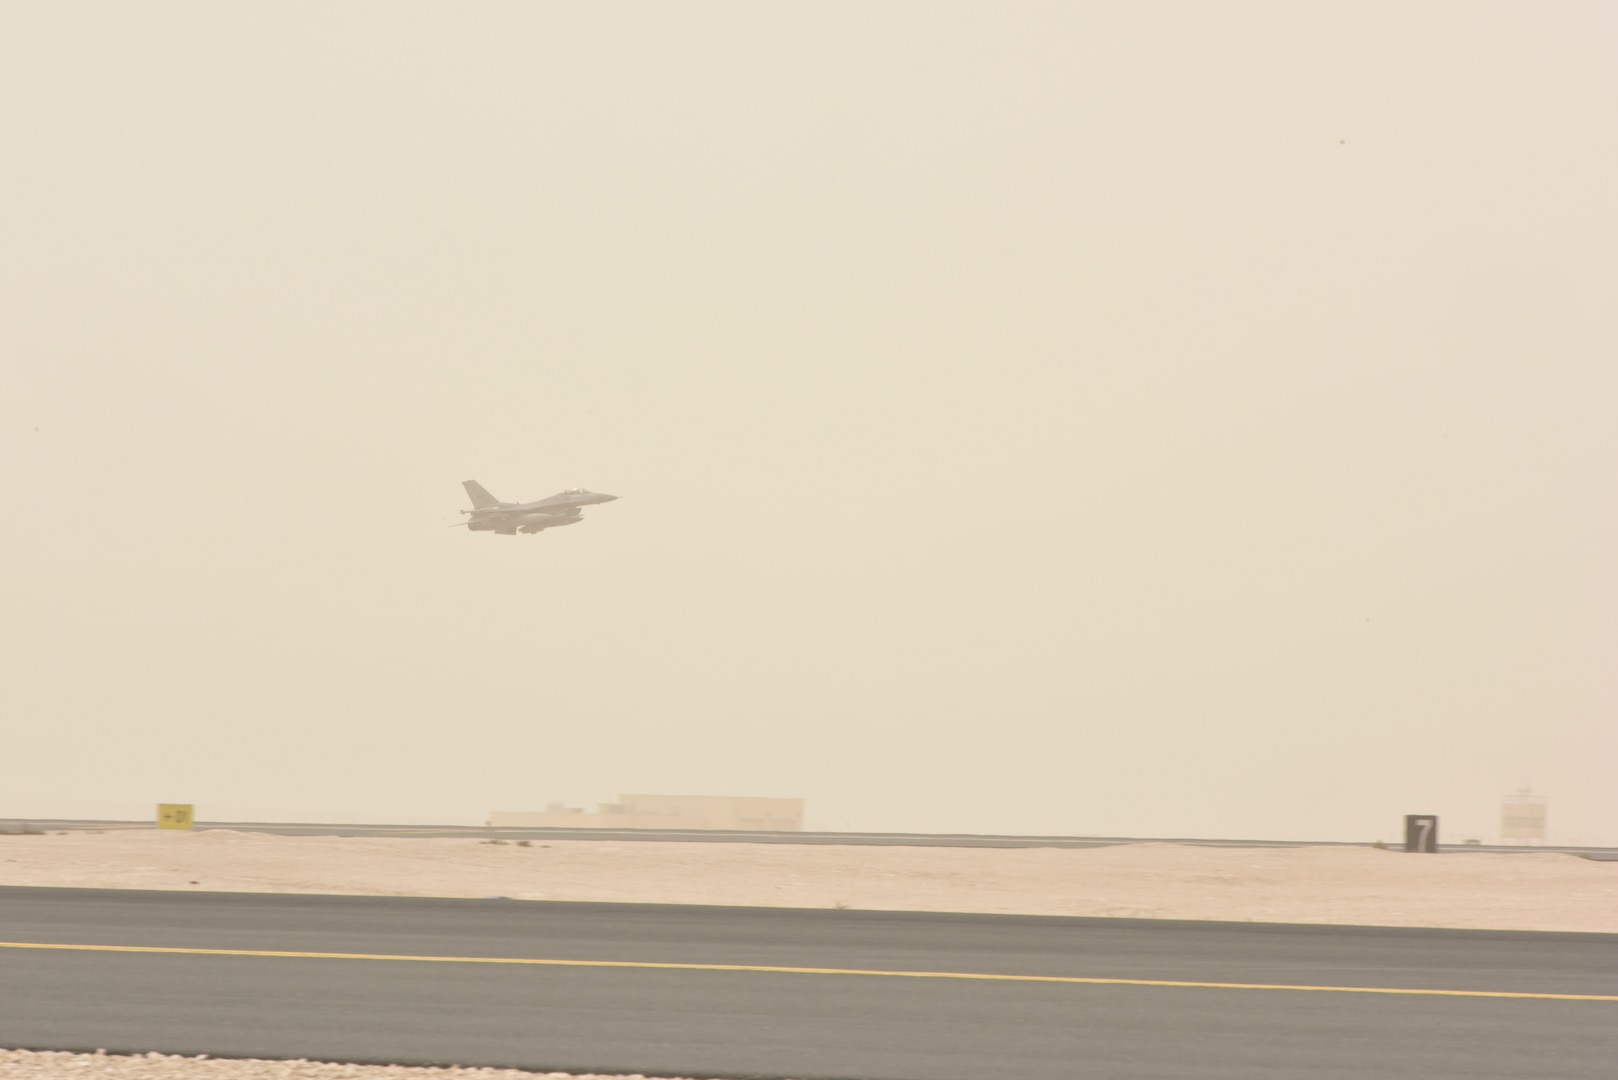 An F-16 Fighting Falcon with the 555th Fighter Squadron, also known as the “world famous, highly-respected” Triple Nickel, takes off at Al Udeid Air Base, Qatar on Feb. 26,  2020. While deployed to AUAB, the Triple Nickel flew more than 840 sorties and nearly 5,000 hours in less than 120 days, directly supporting combat operations for Operations Spartan Shield and Inherent Resolve. (U.S. Air Force photo by Tech. Sgt. John Wilkes)